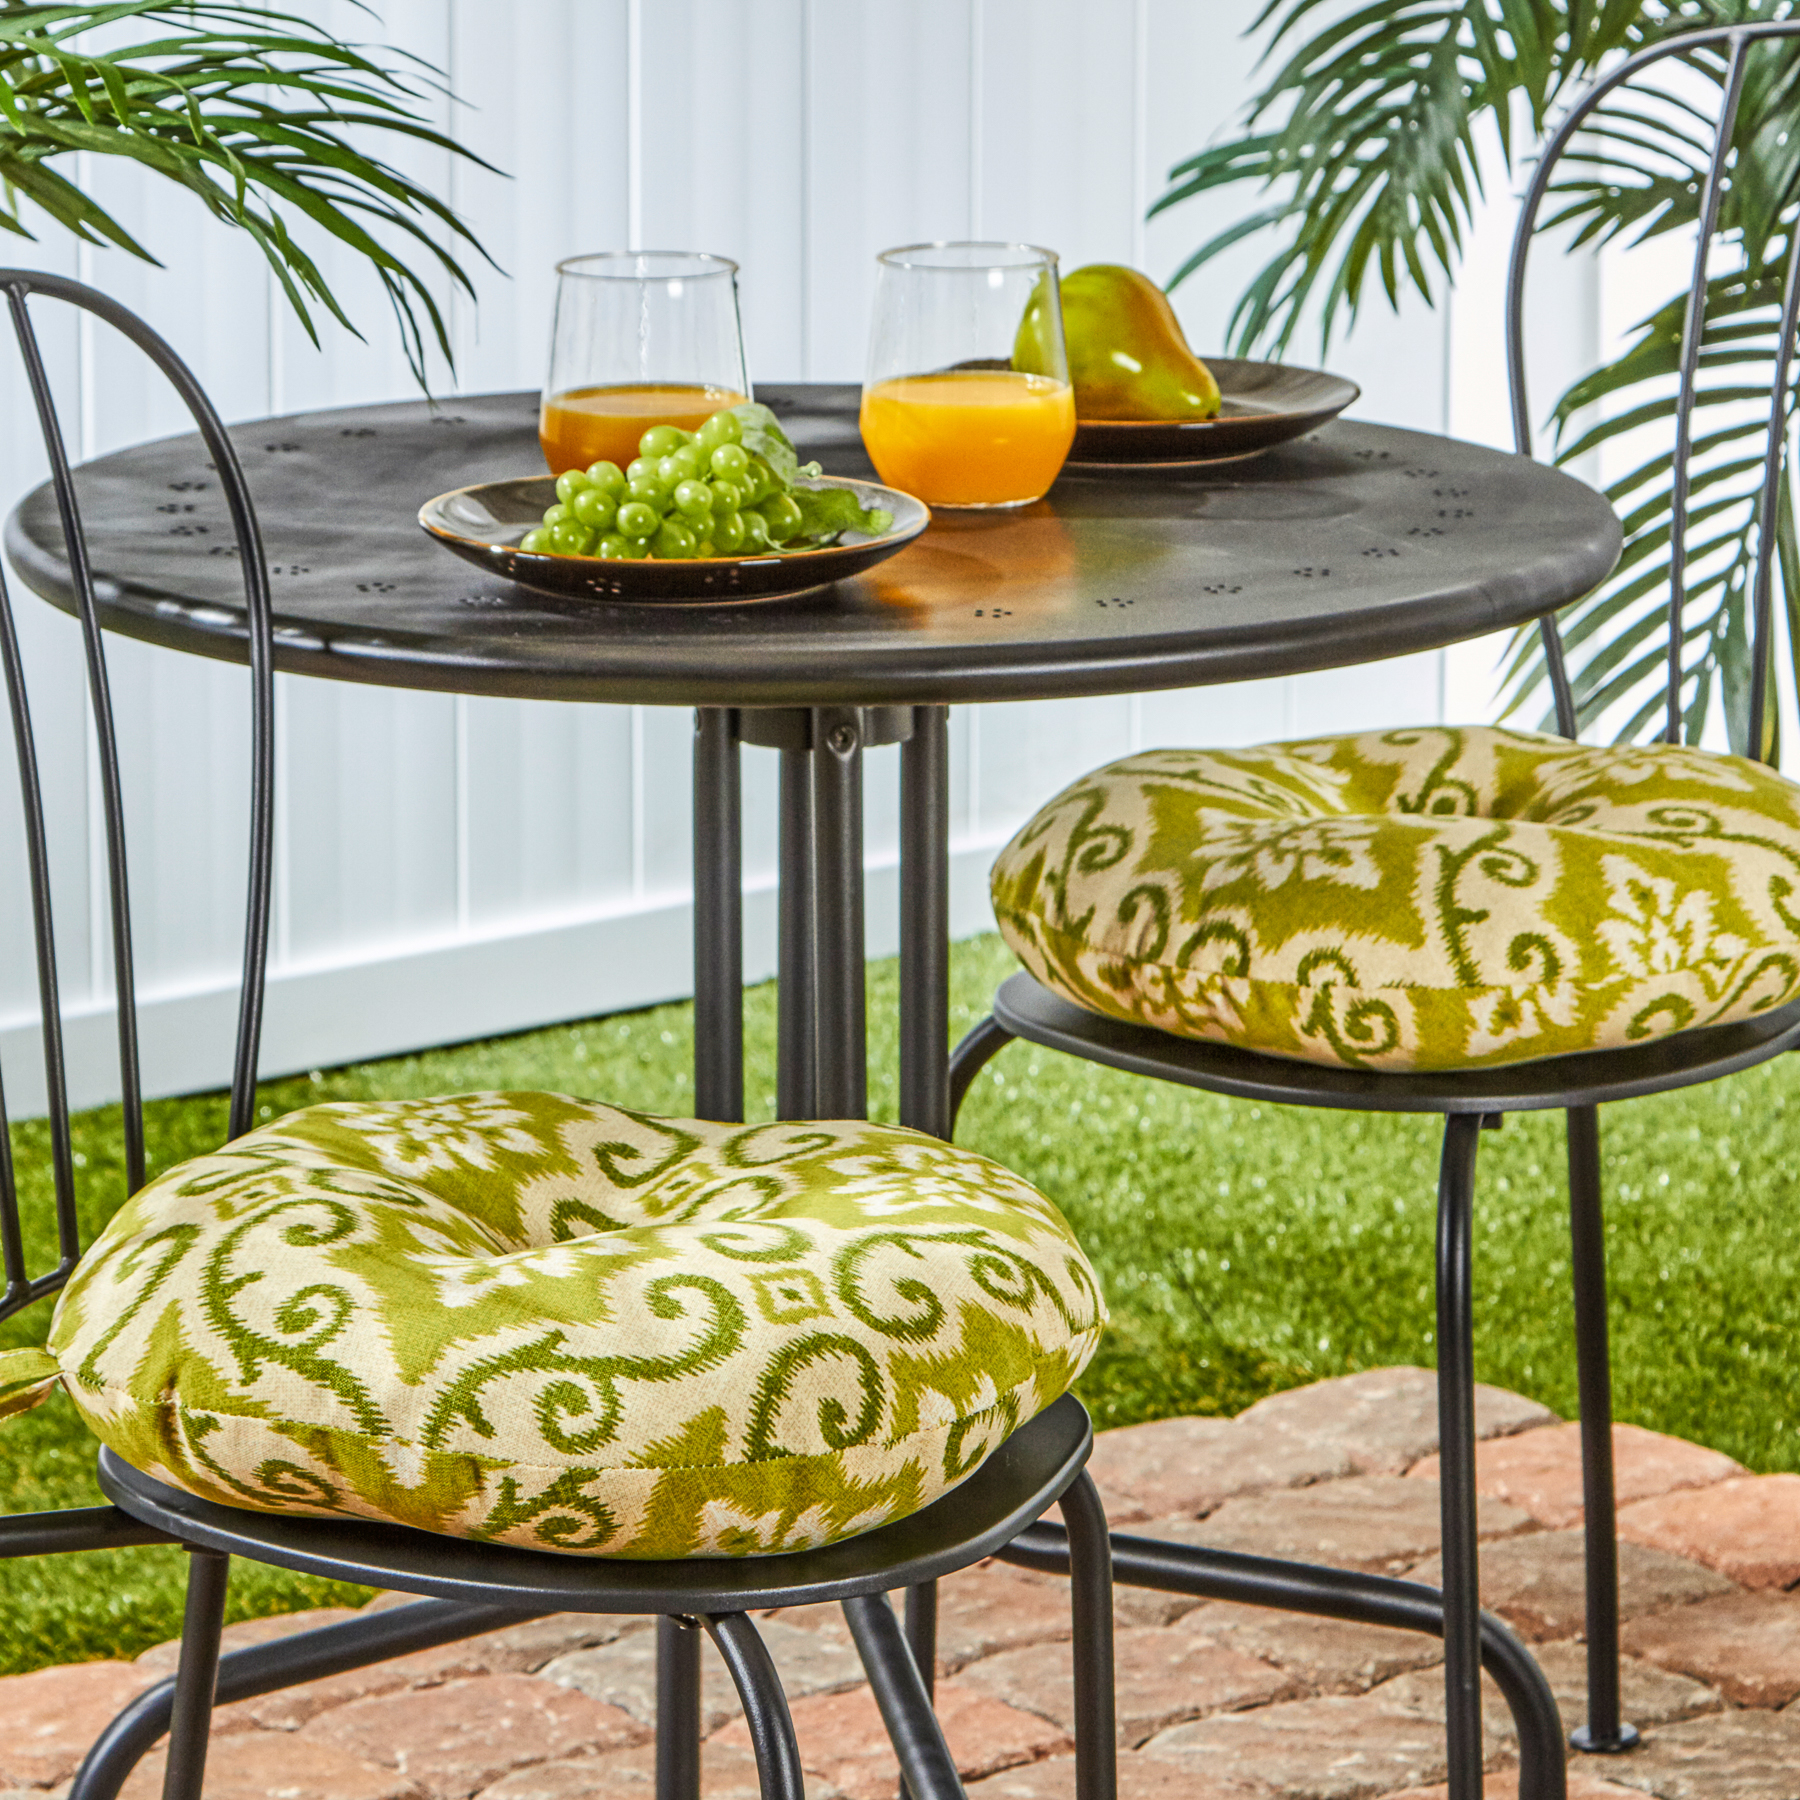 Greendale Home Fashions Shoreham Green Ikat 15 in. Round Outdoor Reversible Bistro Seat Cushion (Set of 2) - image 3 of 6